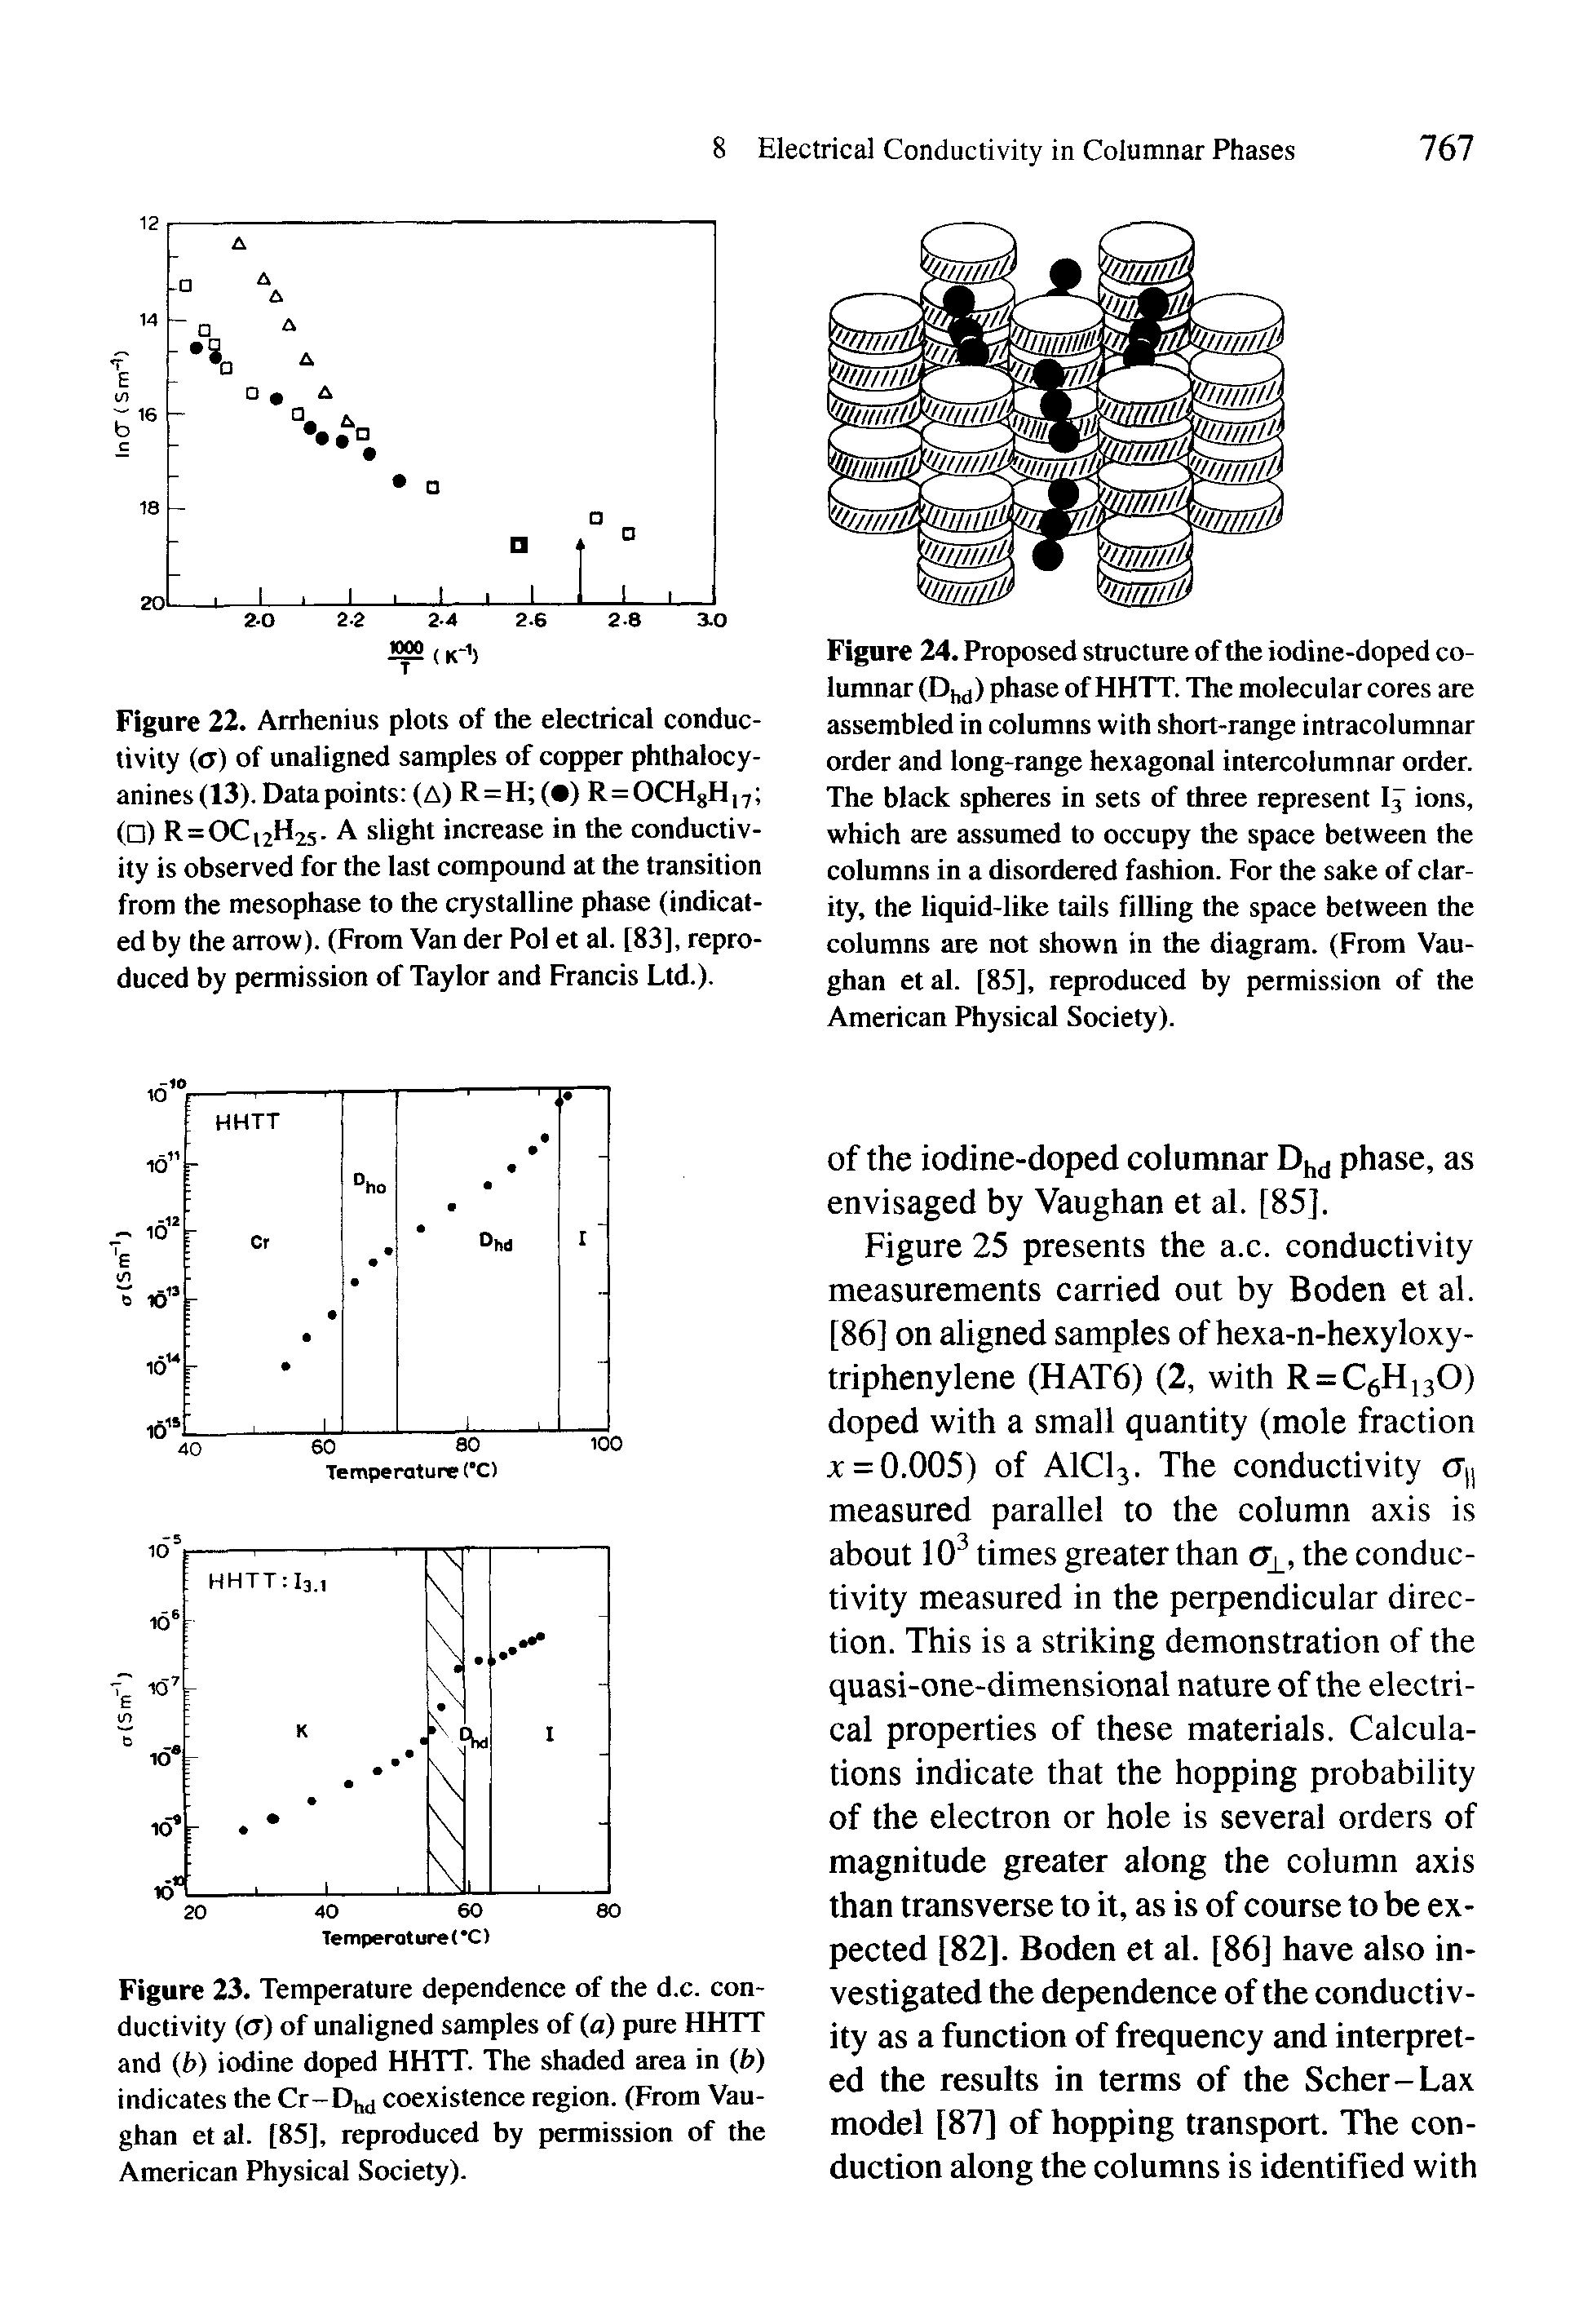 Figure 22. Arrhenius plots of the electrical conductivity (o) of unaligned samples of copper phlhalocy-anines(13). Data points (A) R=H ( ) R=OCHgH,7 ( ) R=OCi2H25. a slight increase in the conductivity is observed for the last compound at the transition from the mesophase to the crystalline phase (indicated by the arrow). (From Van der Pol et al. [83], reproduced by permission of Taylor and Francis Ltd.).